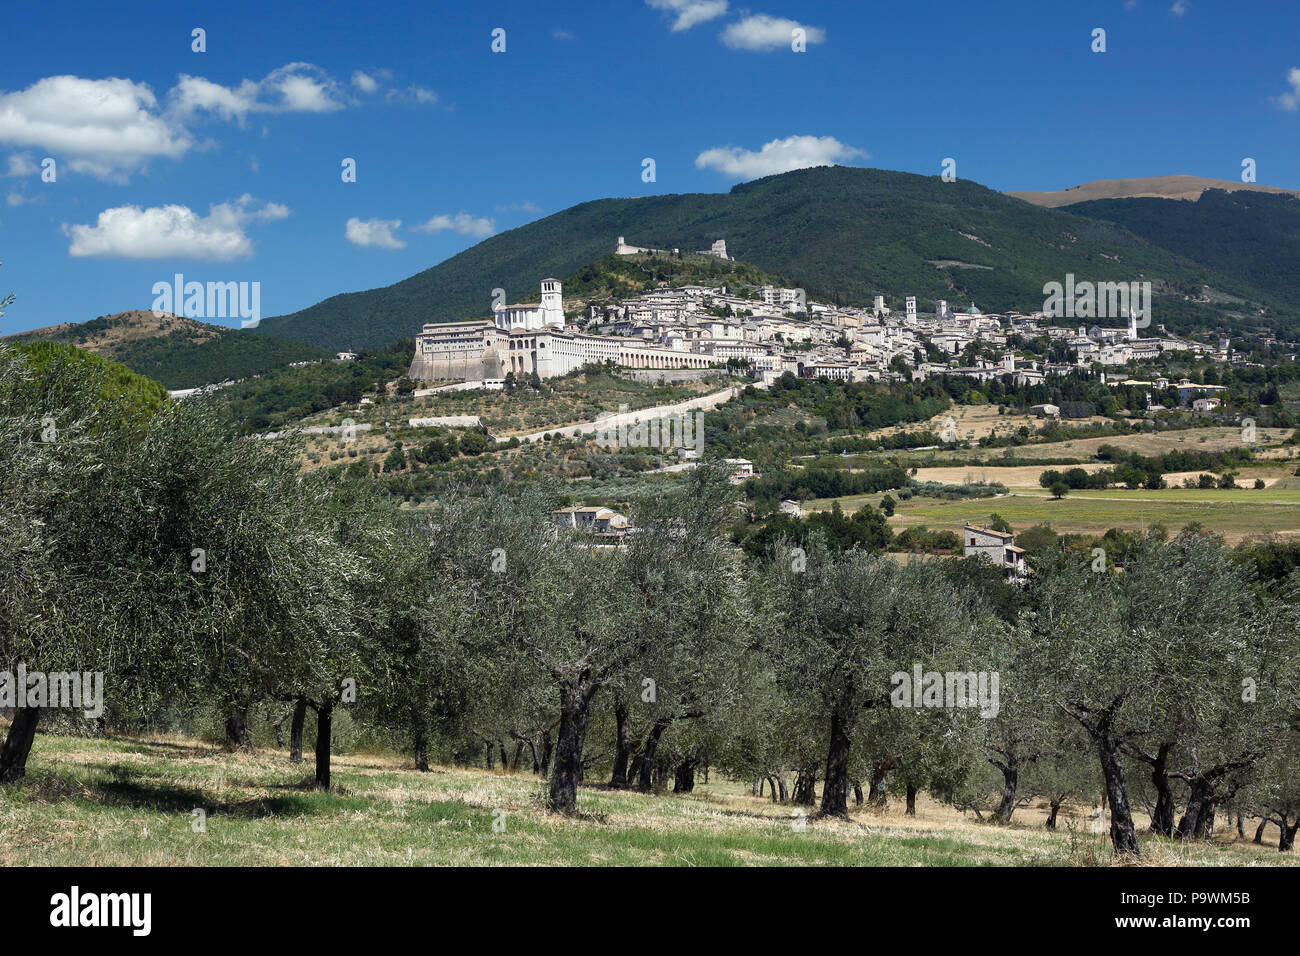 View of olive grove with city, Assisi, Umbria, Italy Stock Photo